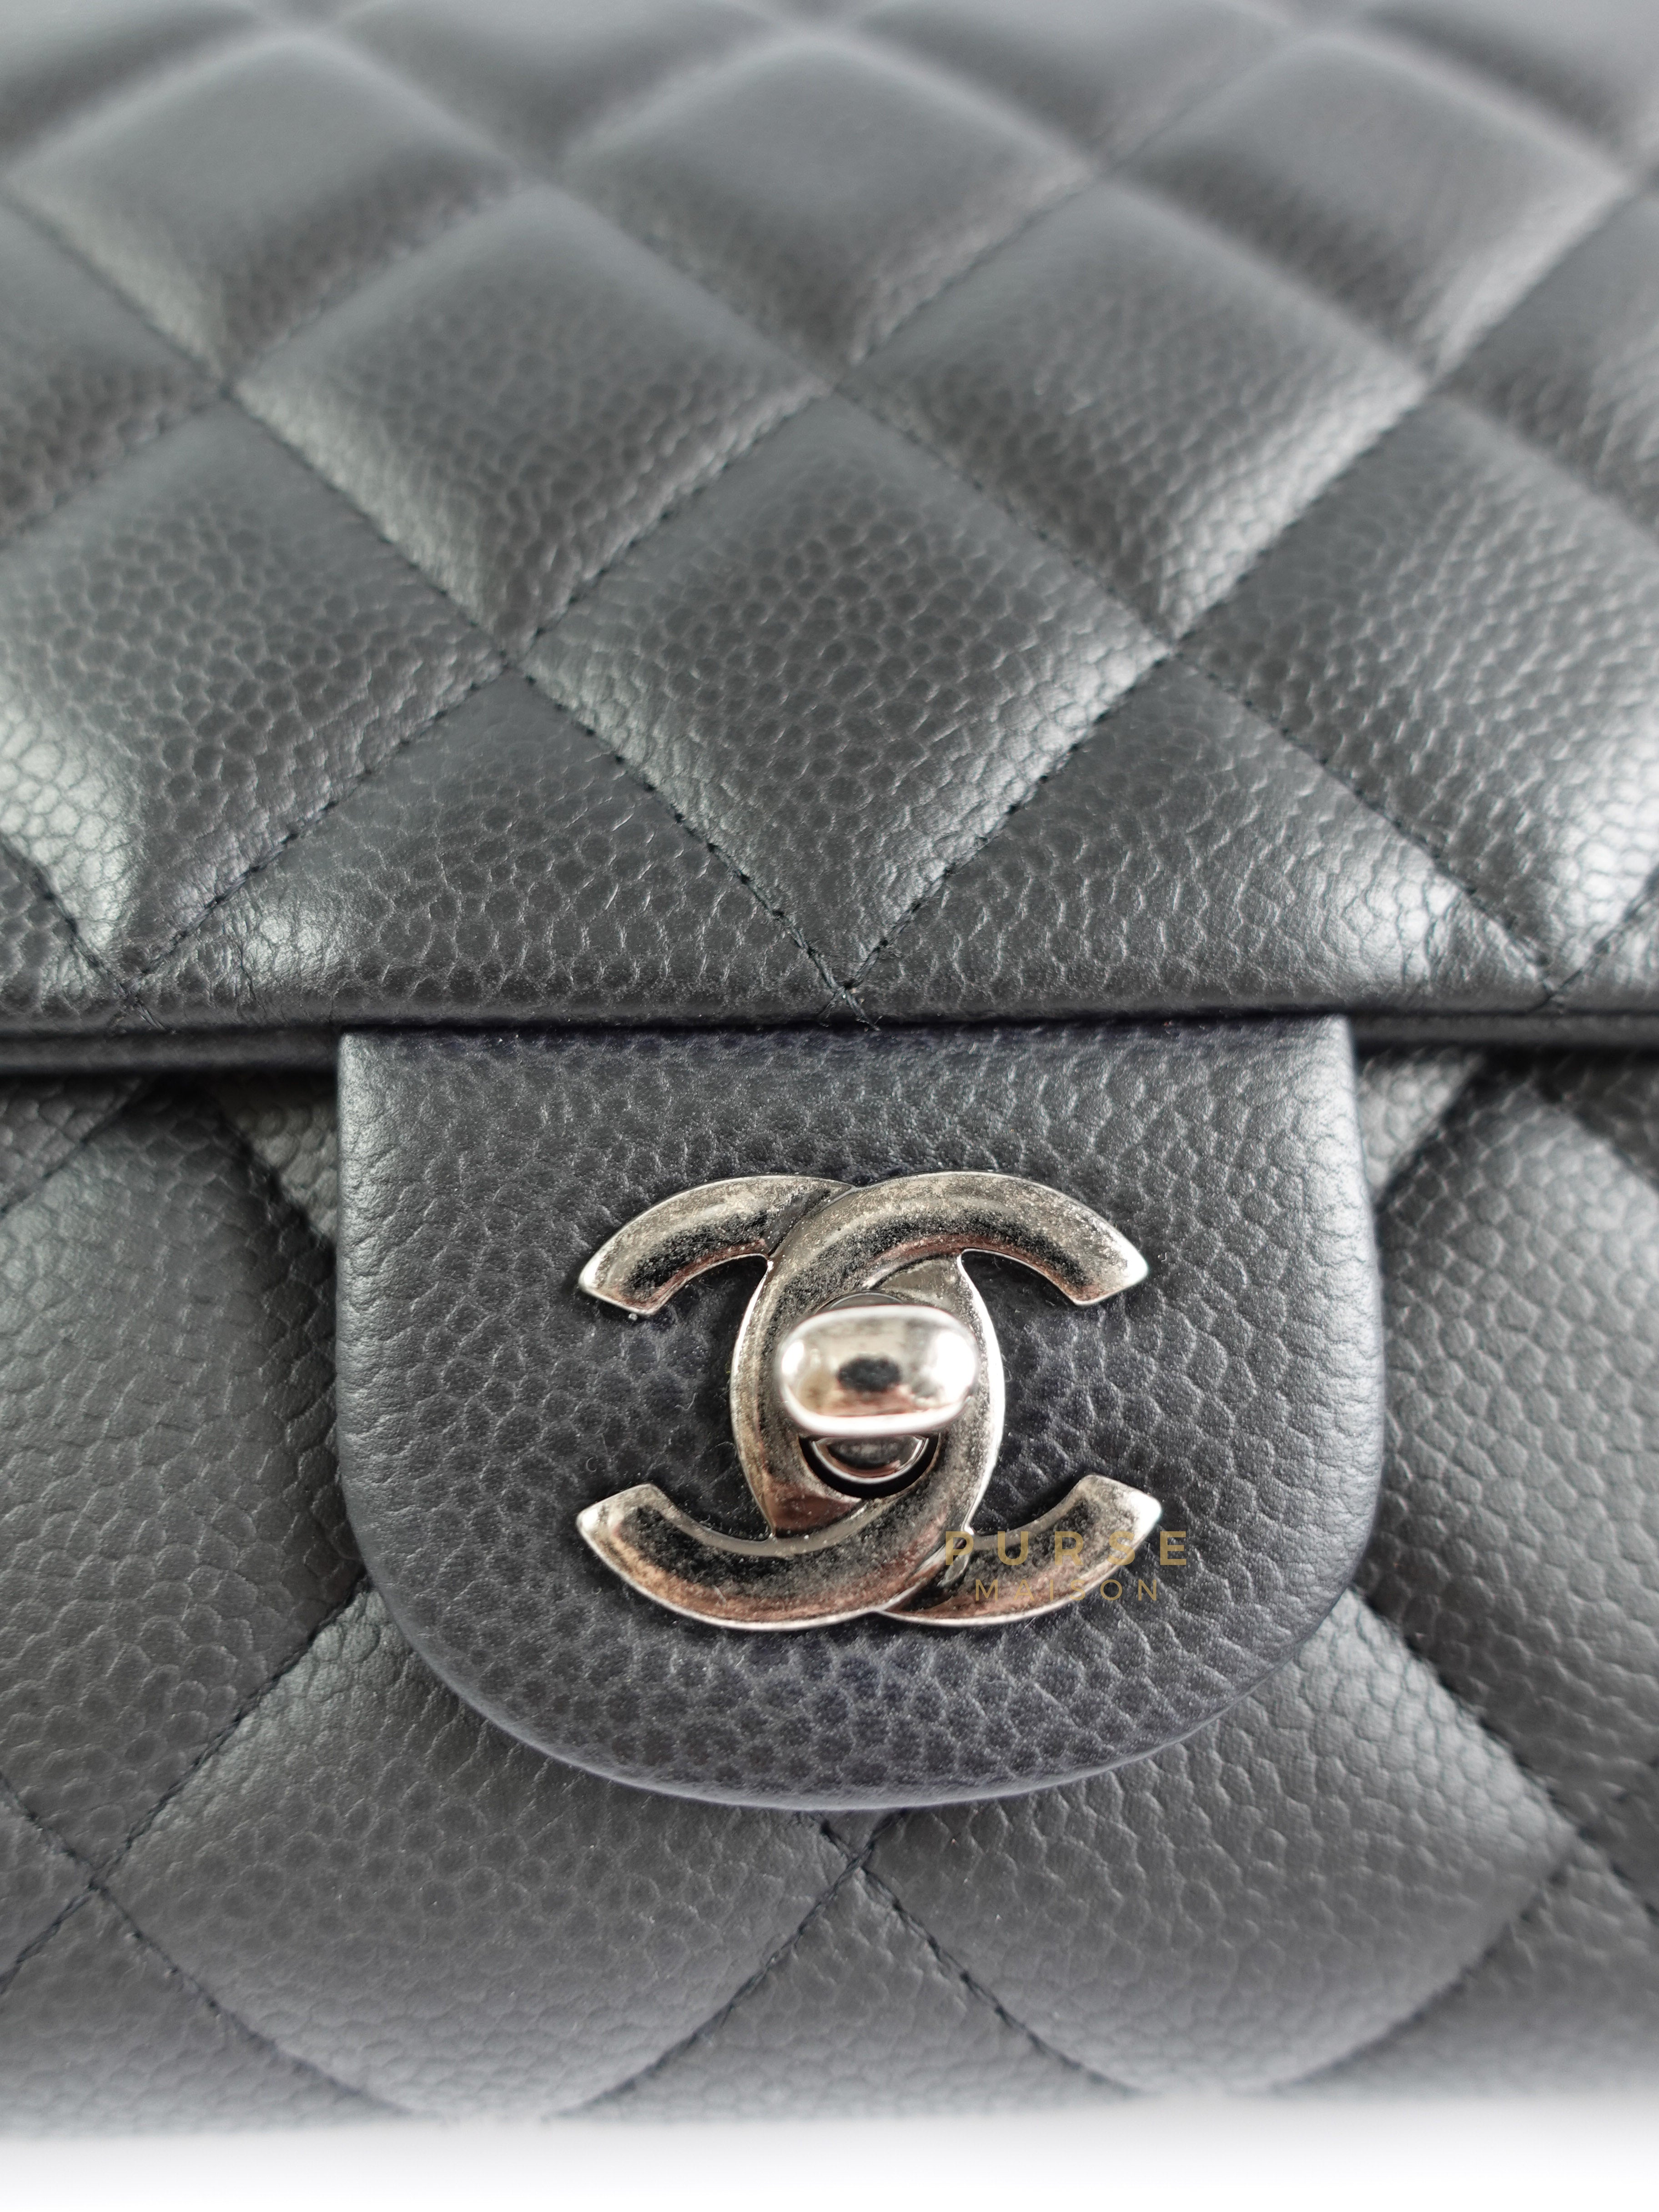 Timeless Clutch Flap in Black Caviar Leather and Ruthenium Hardware Series 21 | Purse Maison Luxury Bags Shop